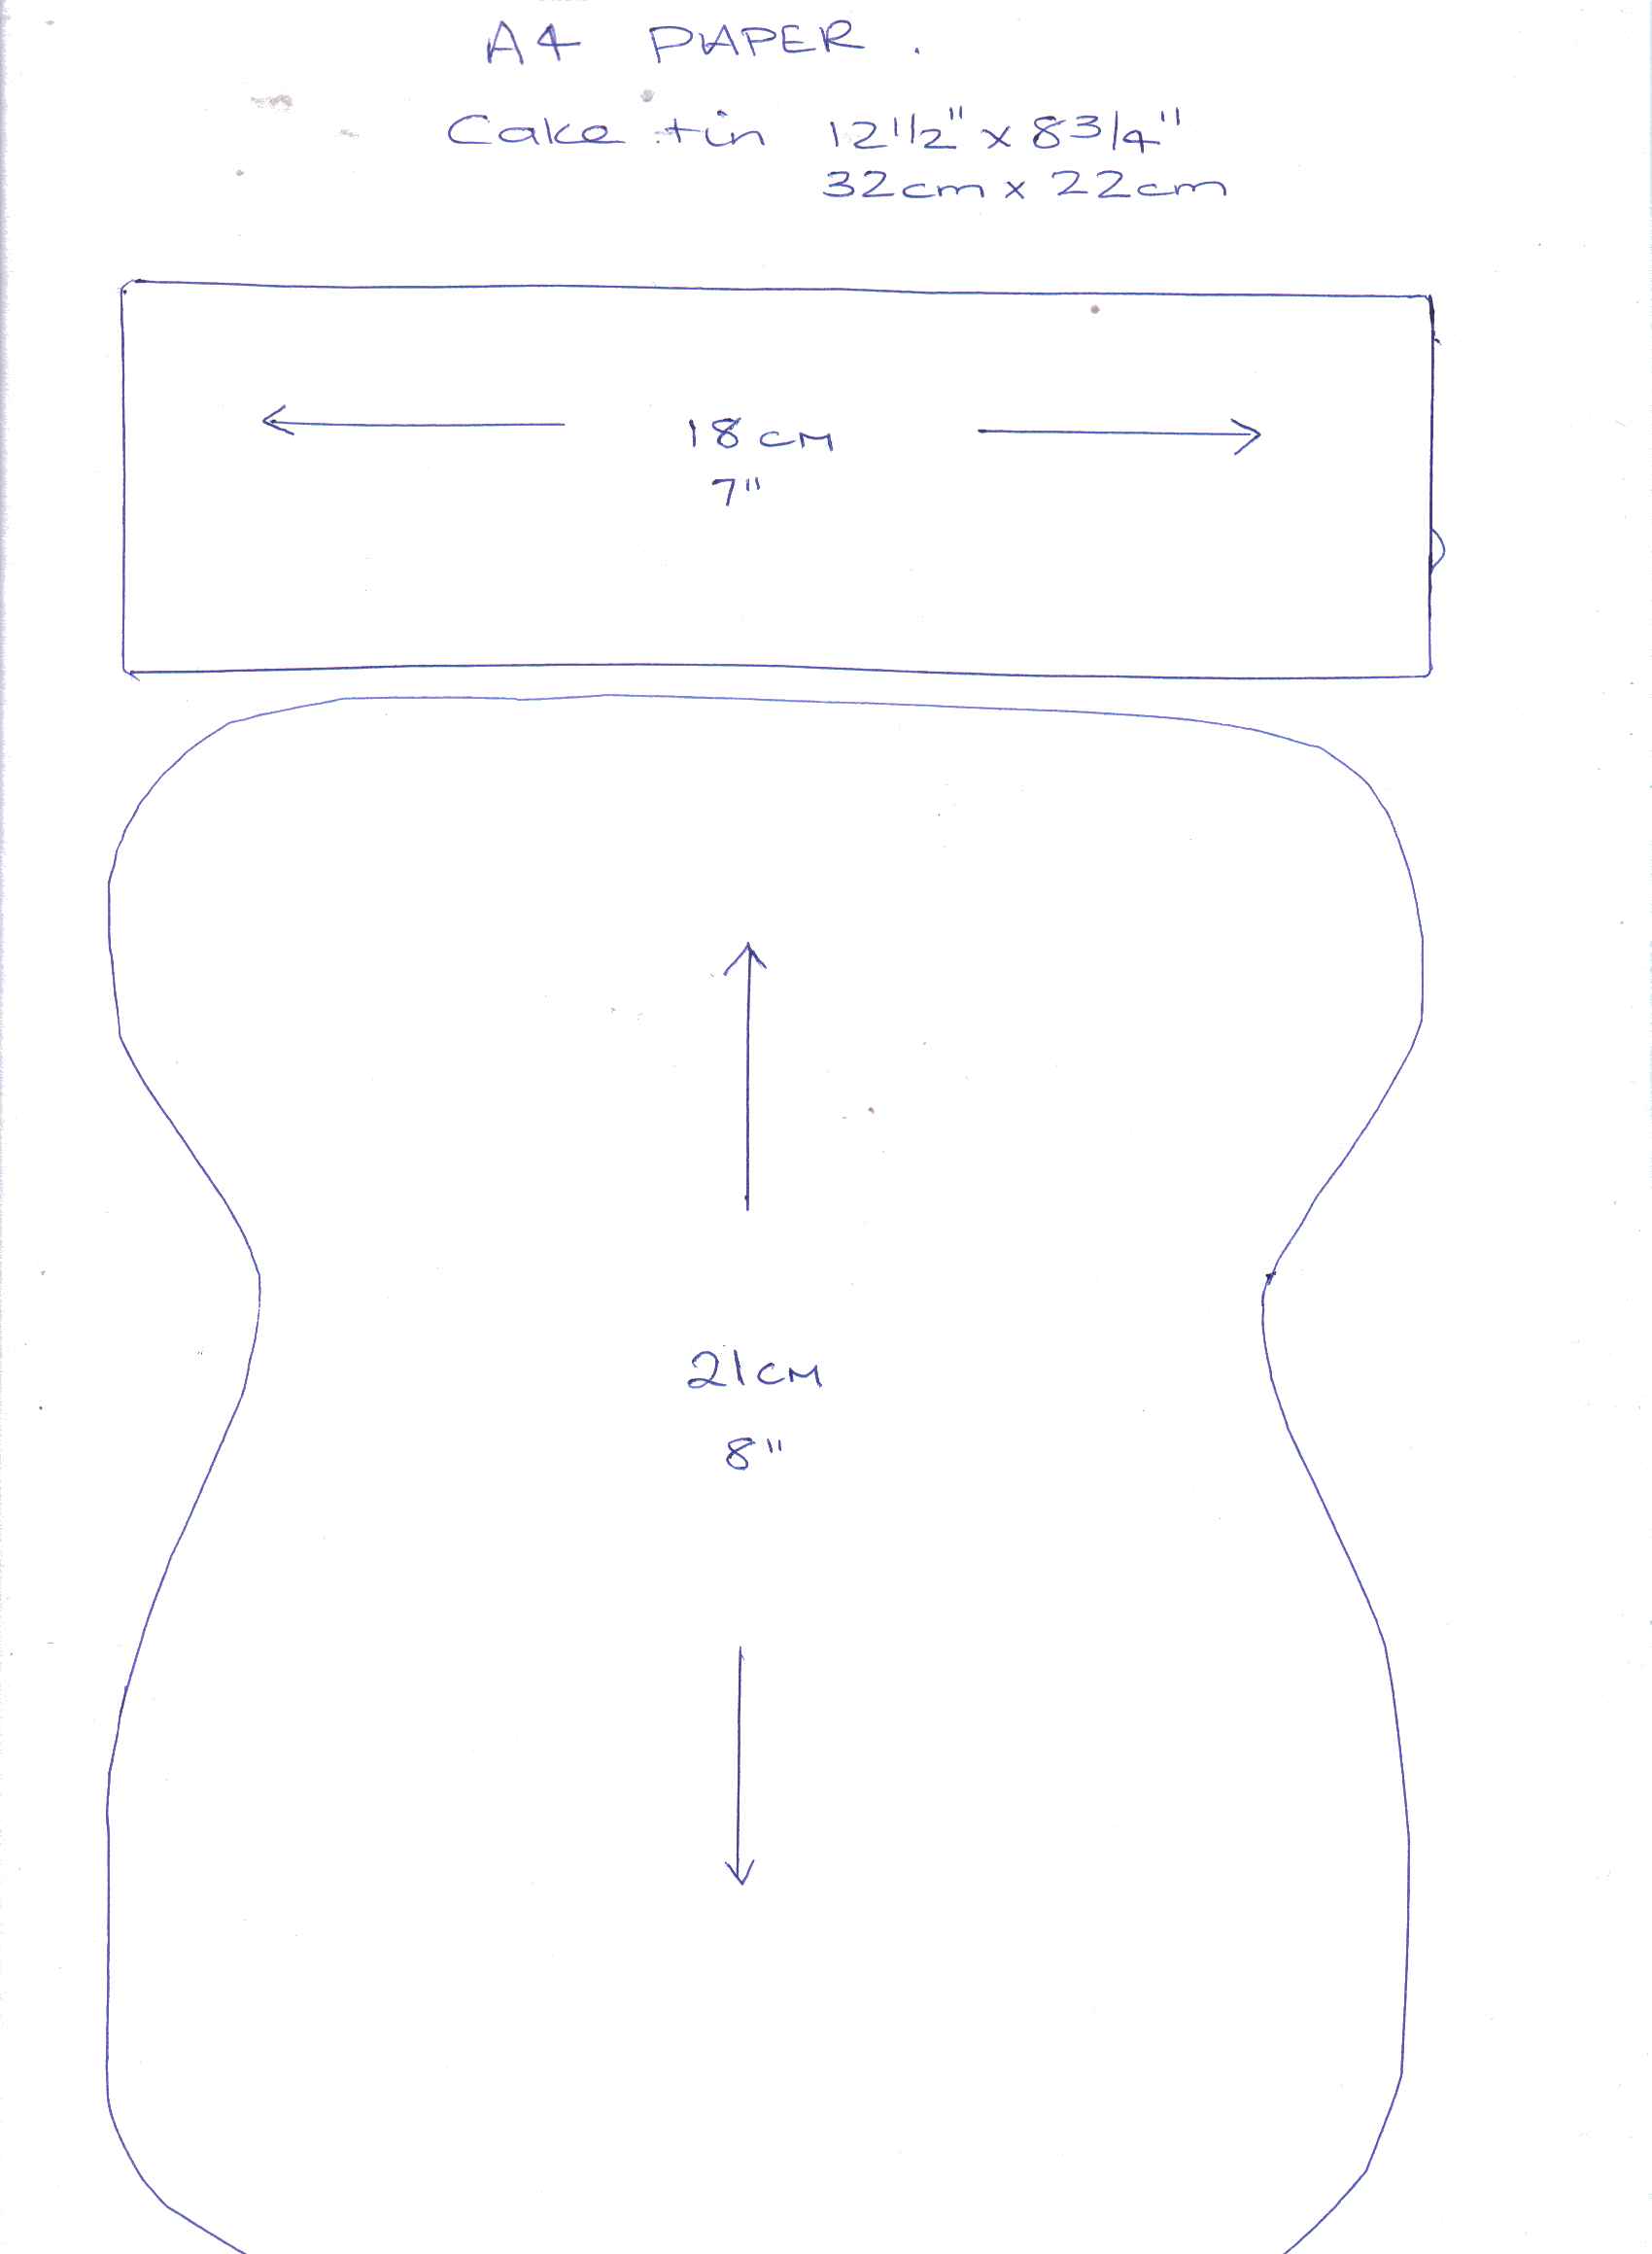 Guitar Cut Out Template for Cakes